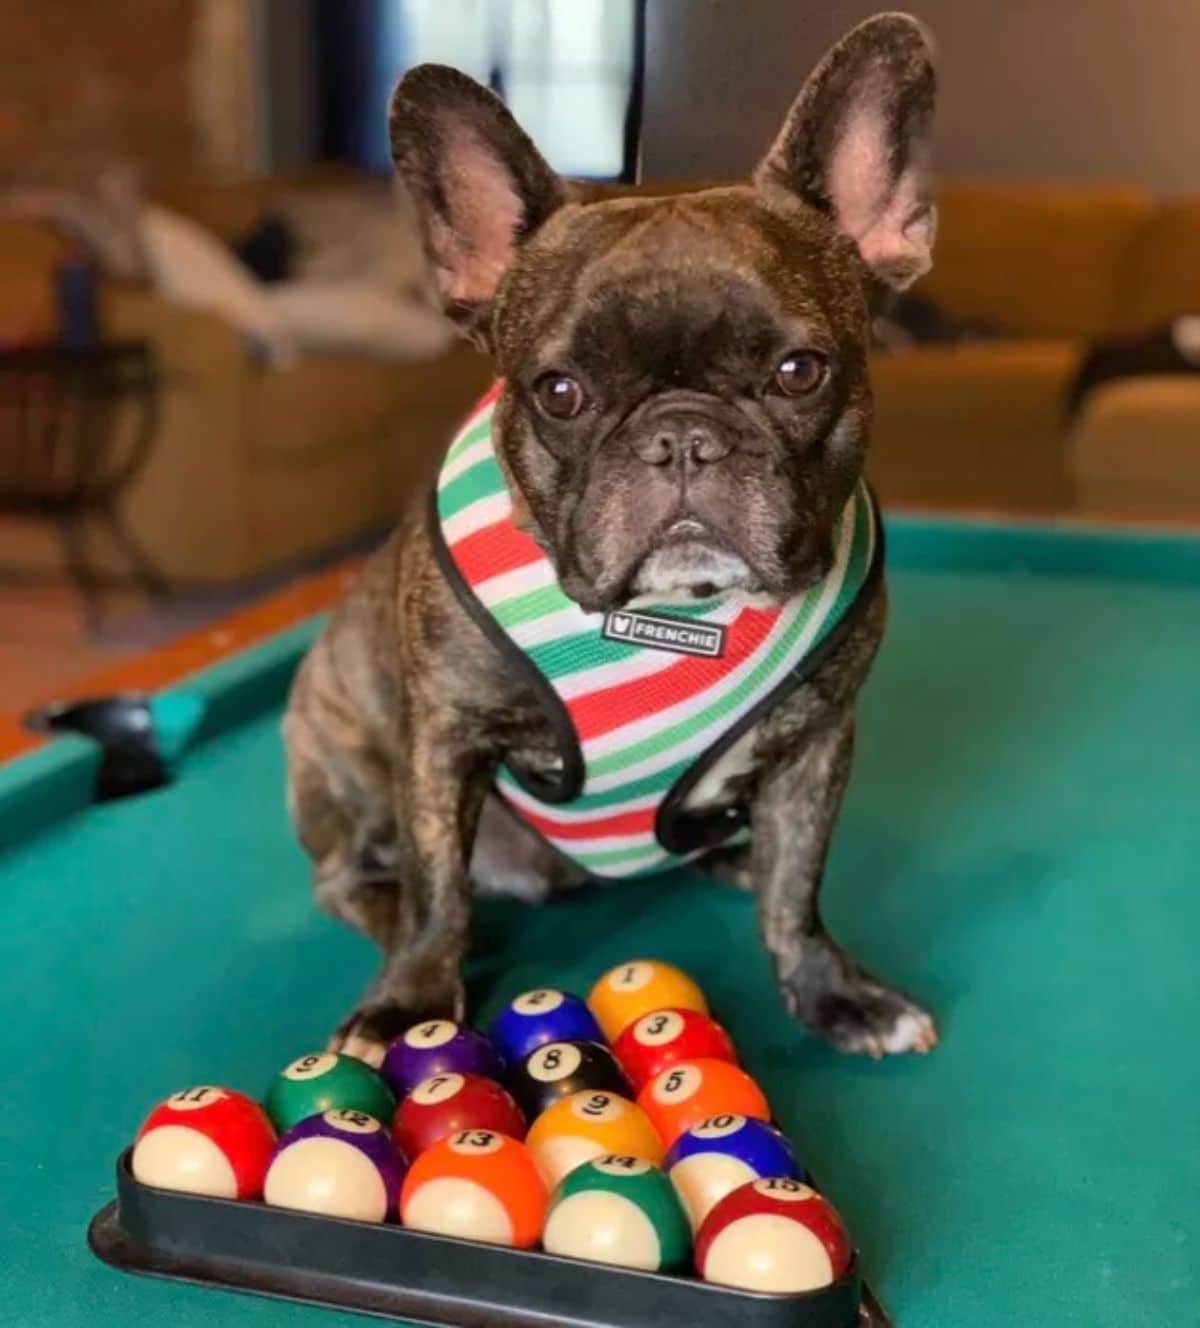 small brown and black brindle dog sitting on a green pool table